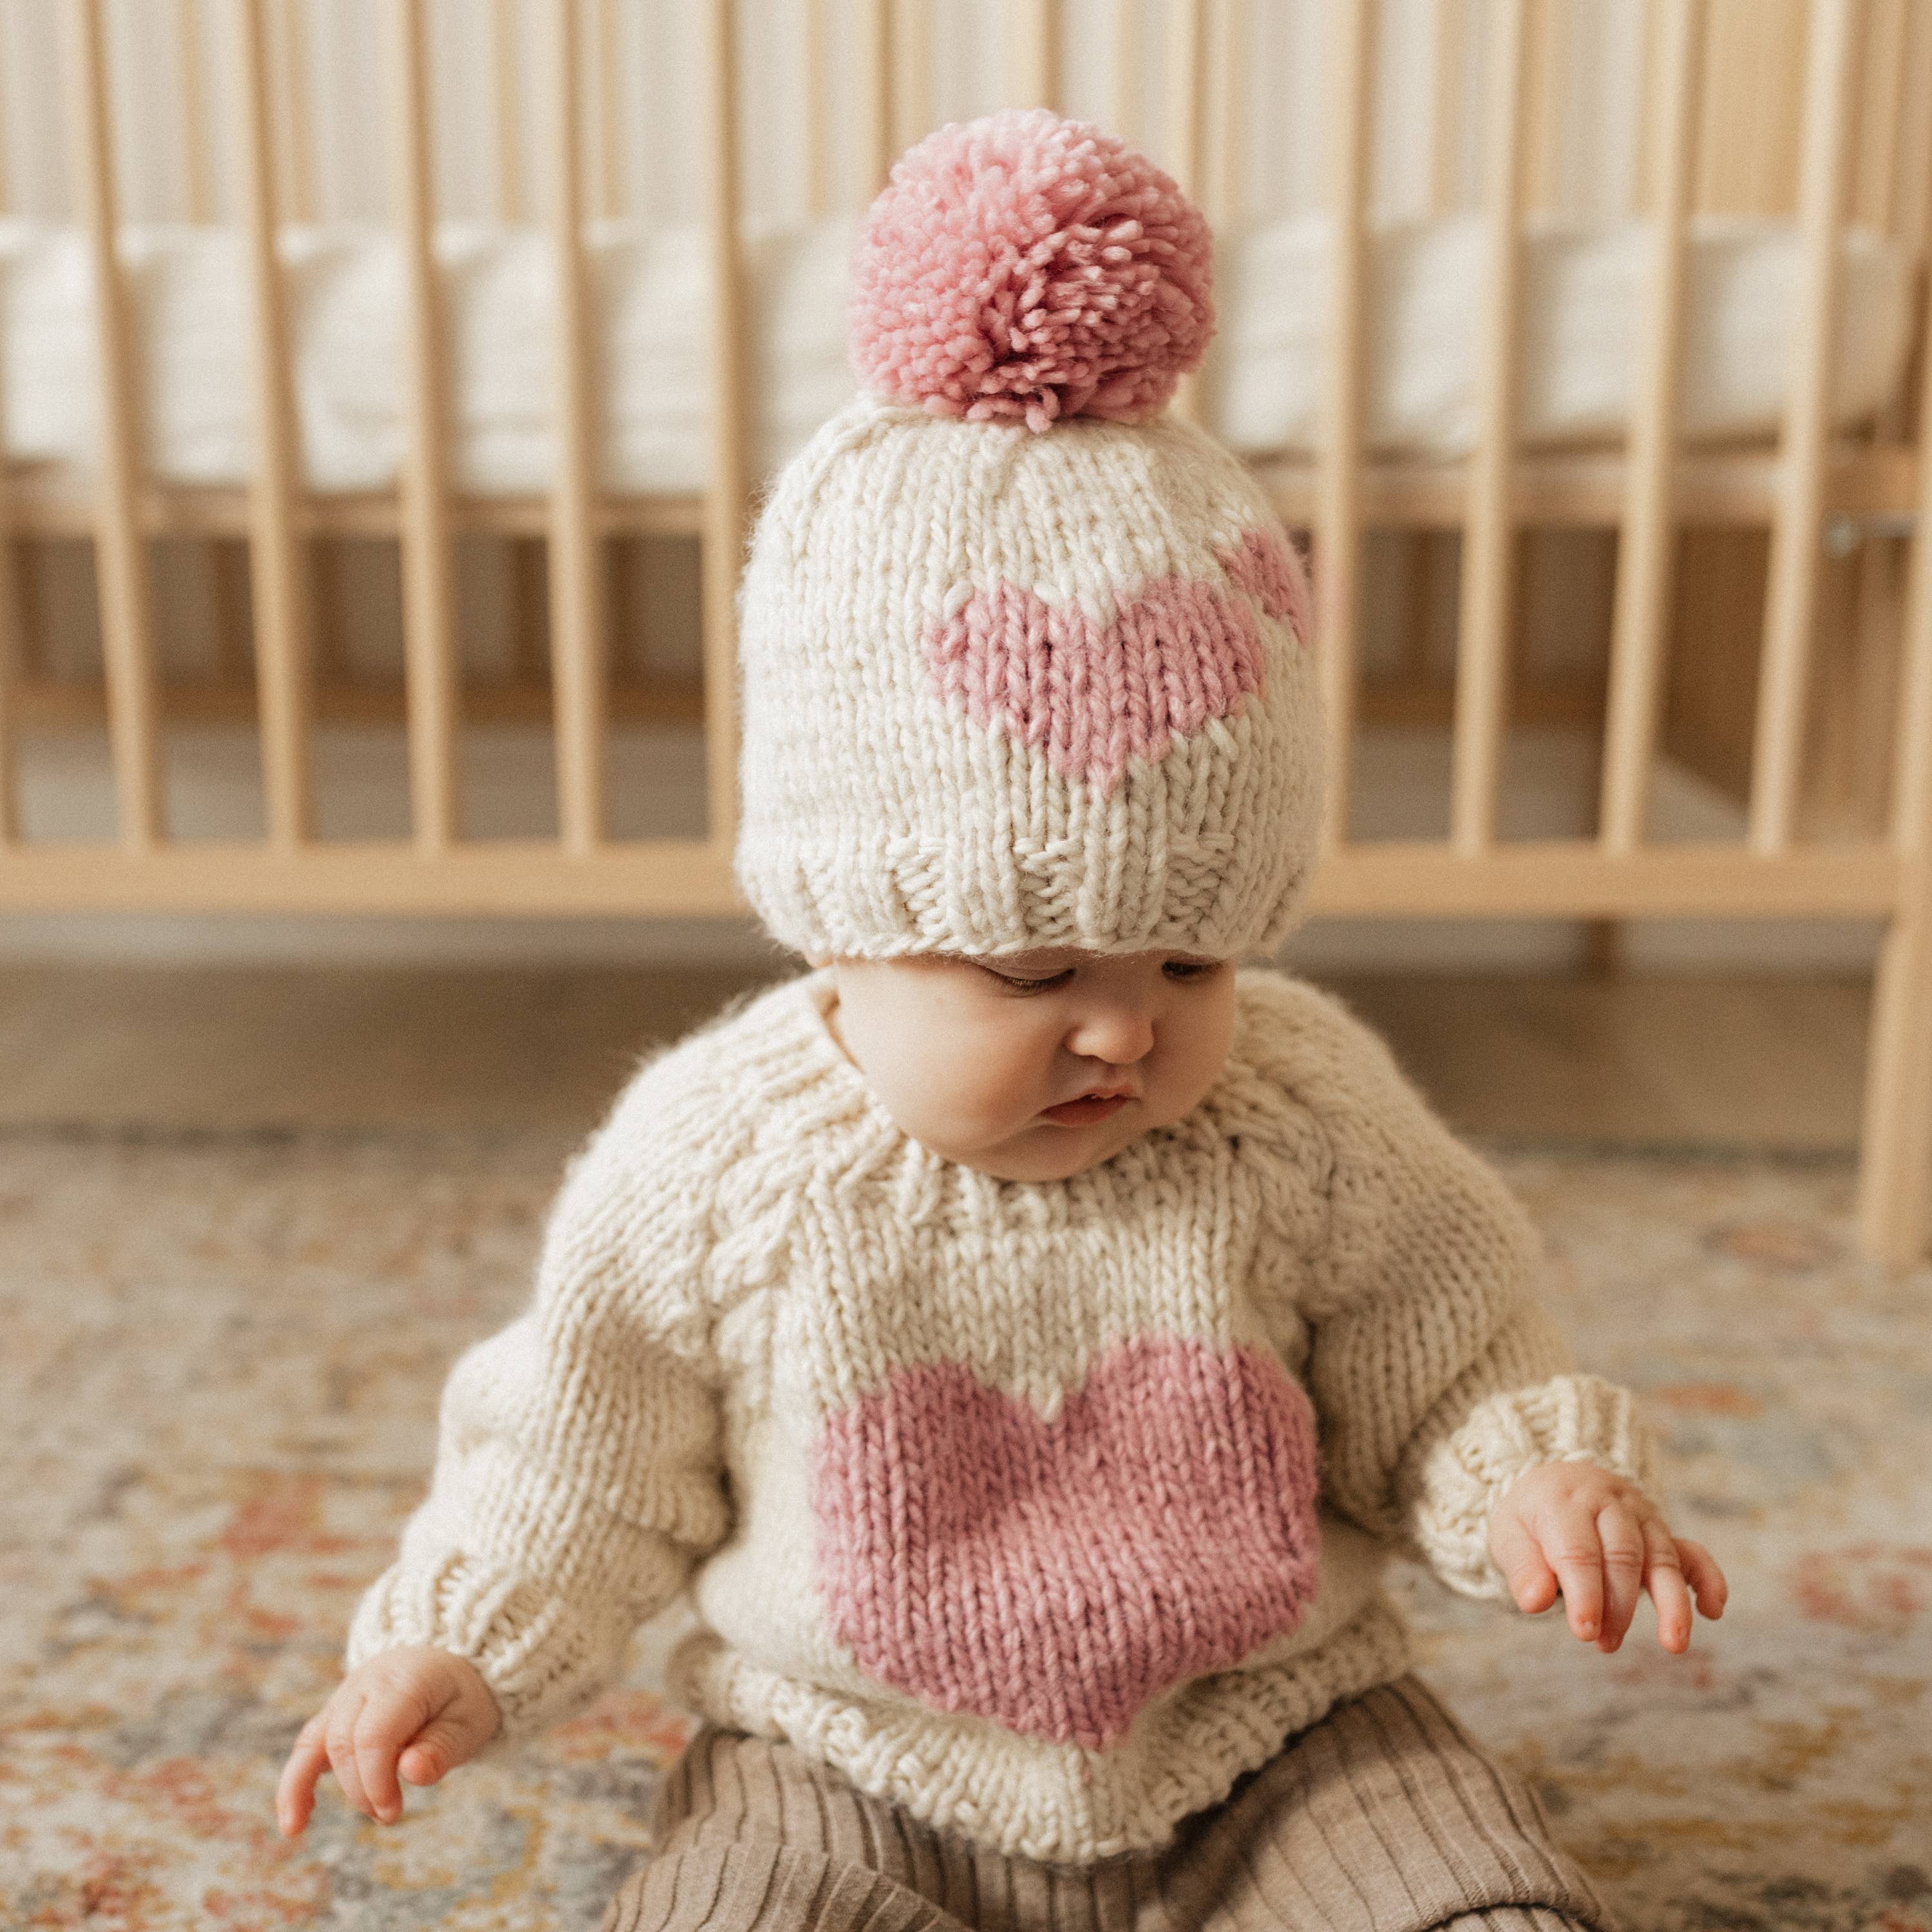 Huggalugs - Sweetheart Knit Beanie Hat Rosy: M (6-24 months)